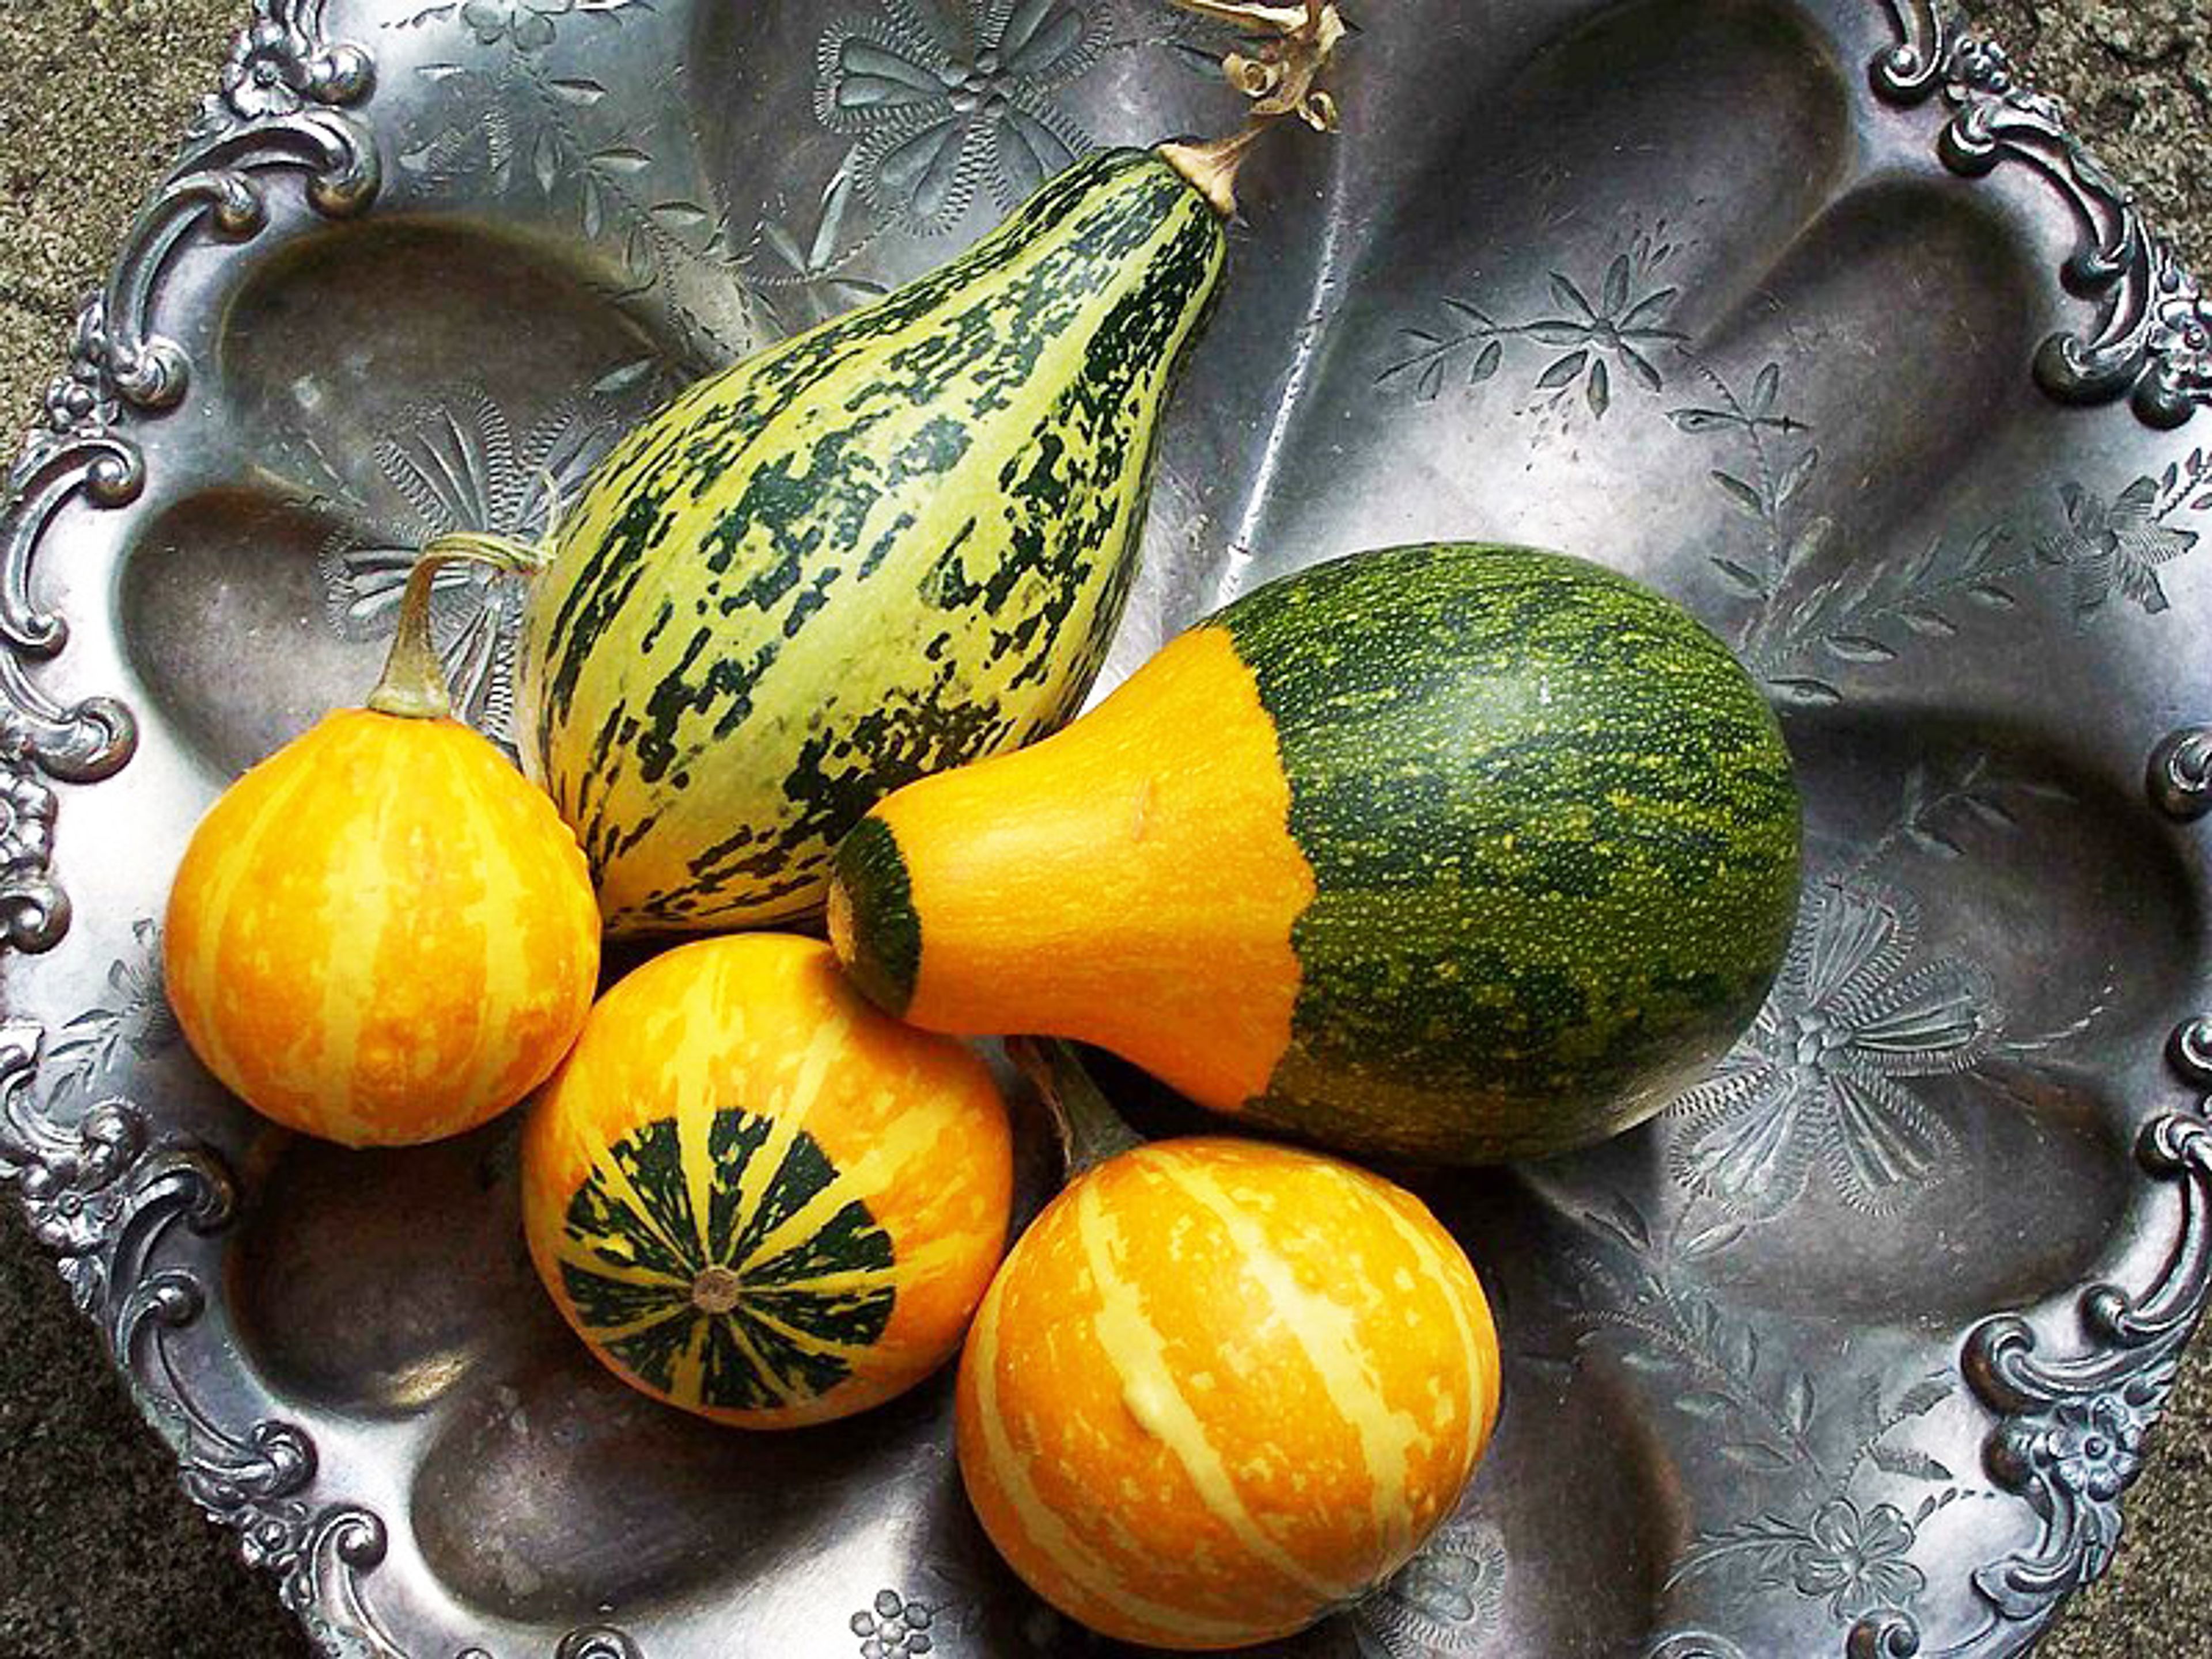 Gourds have been used to make everything from kitchen utensils to bongo drums.